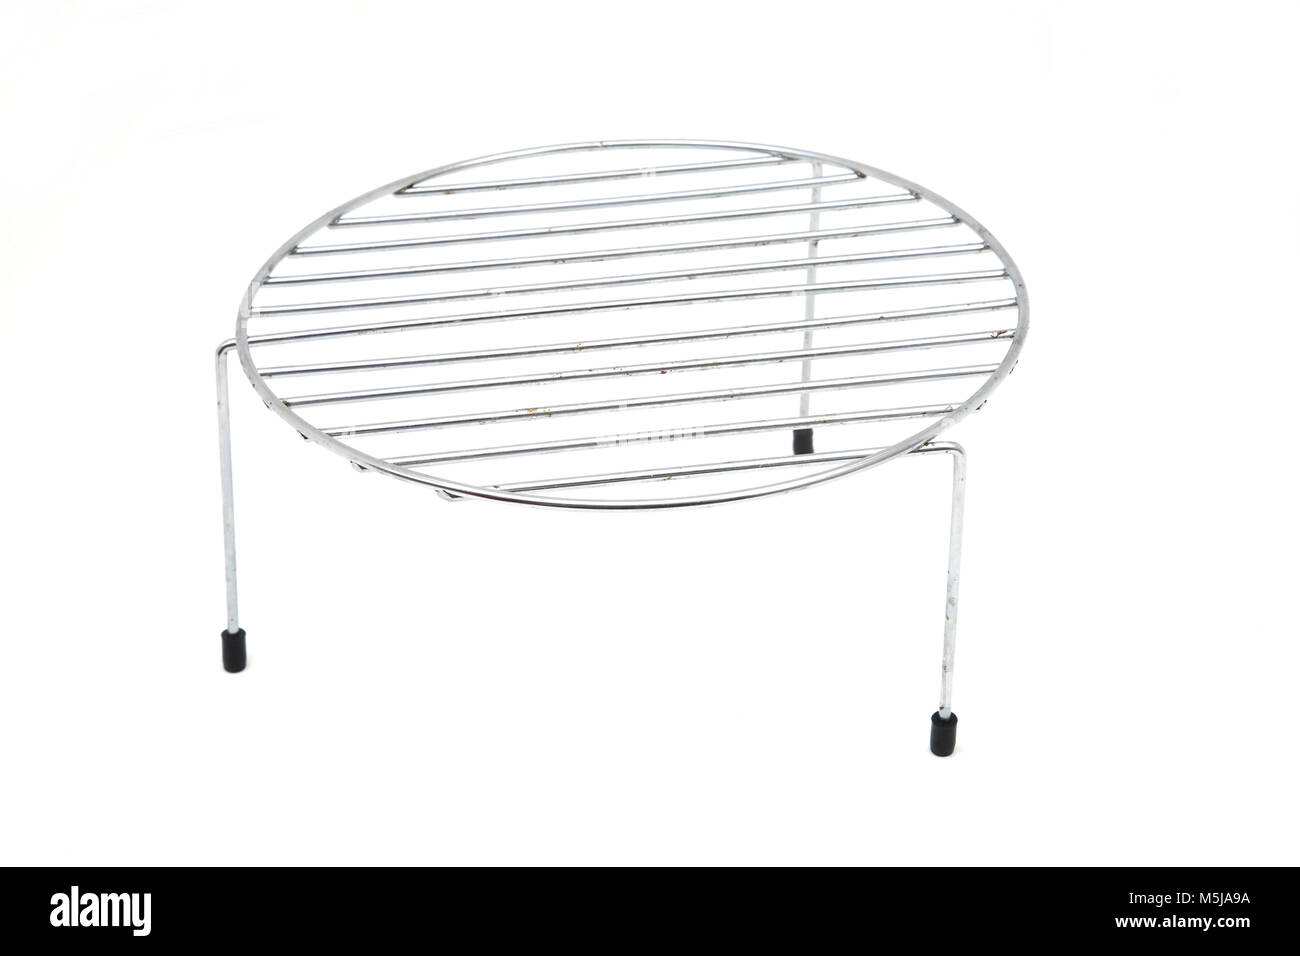 Stainless Steel Cooling Rack Stock Photo